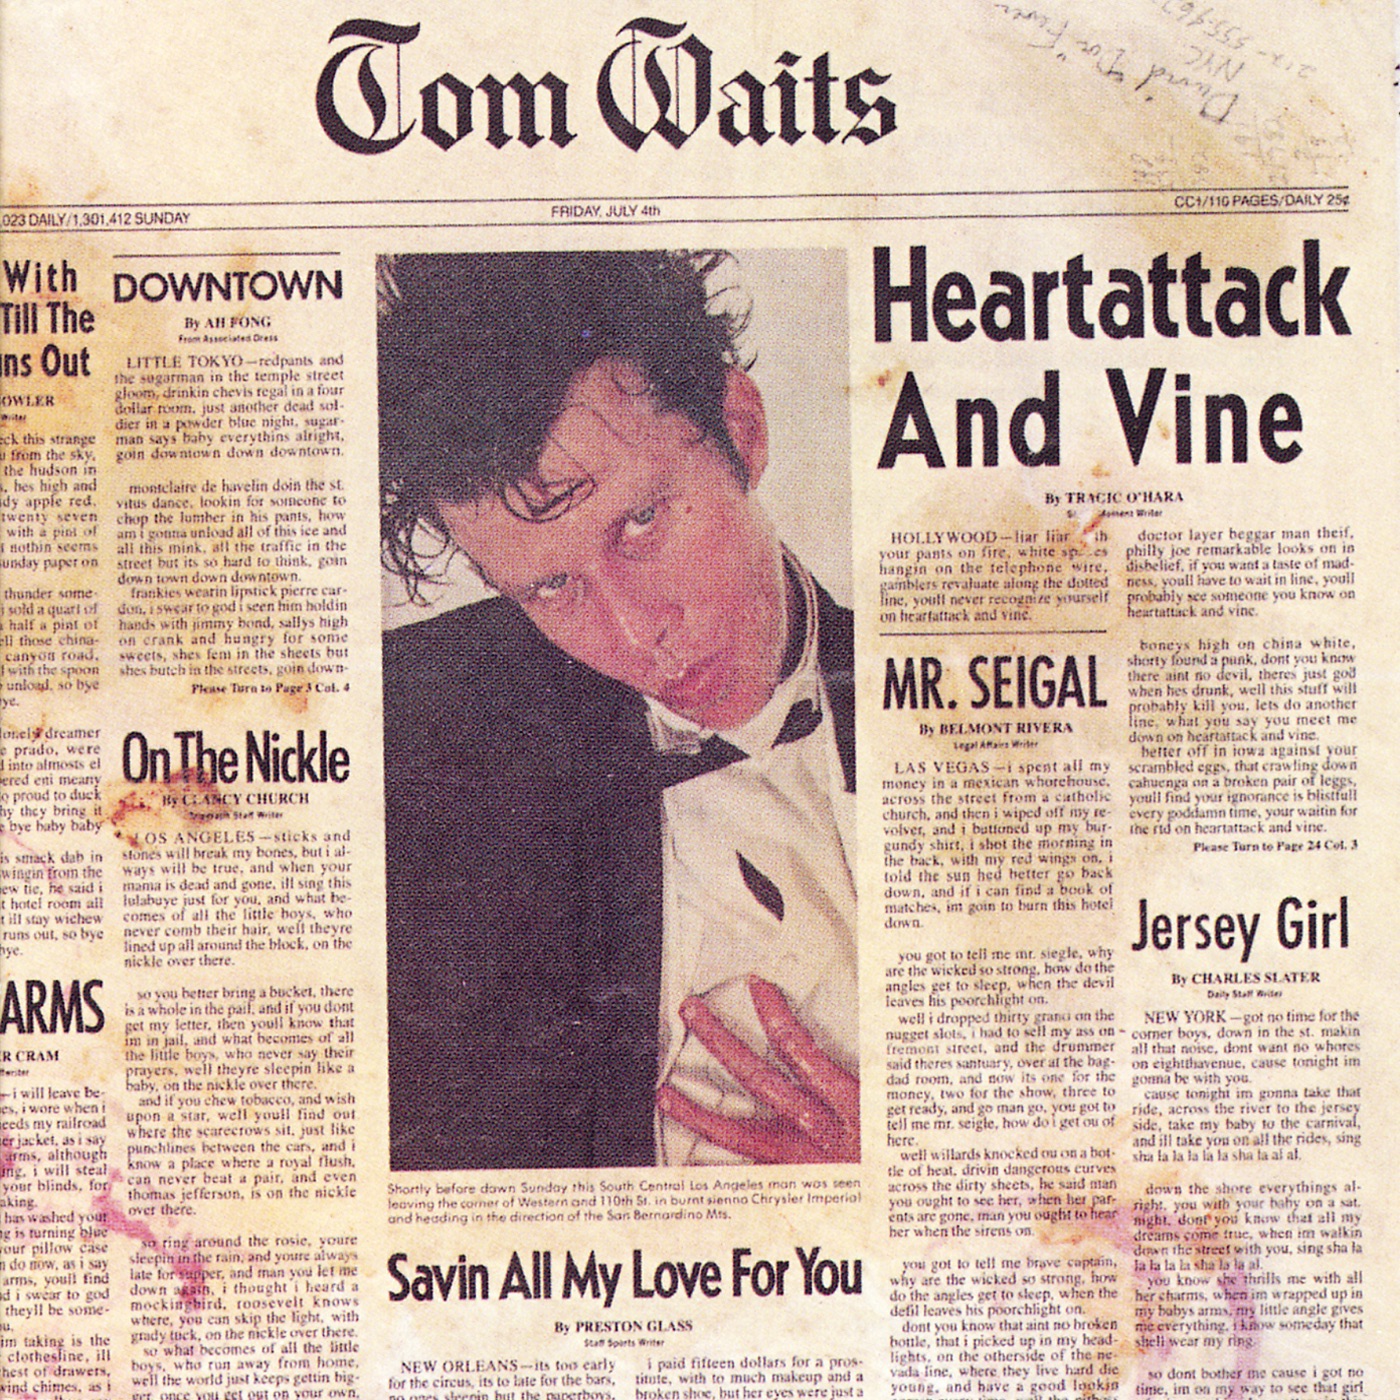 Heartattack And Vine (Remastered) by Tom Waits